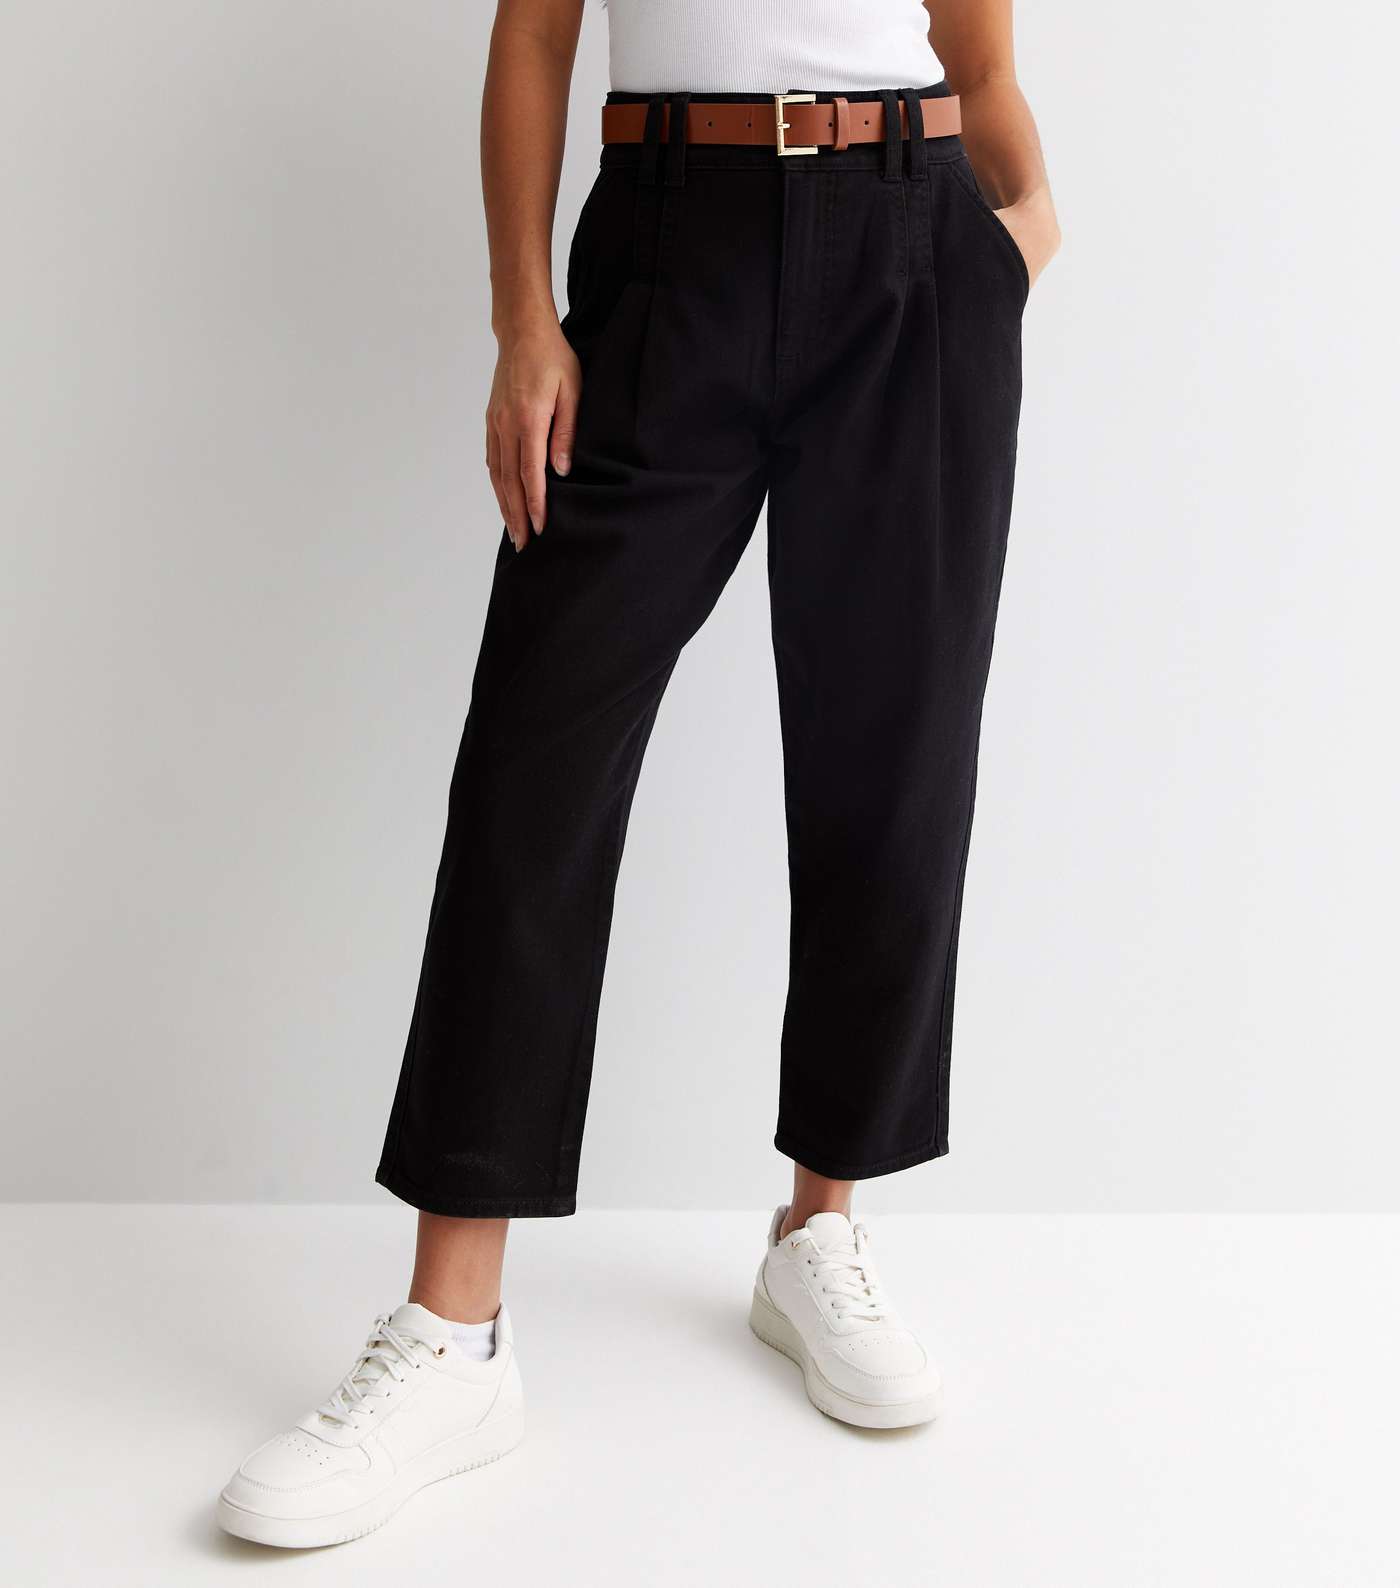 Petite Black Cotton Belted Crop Trousers Image 2